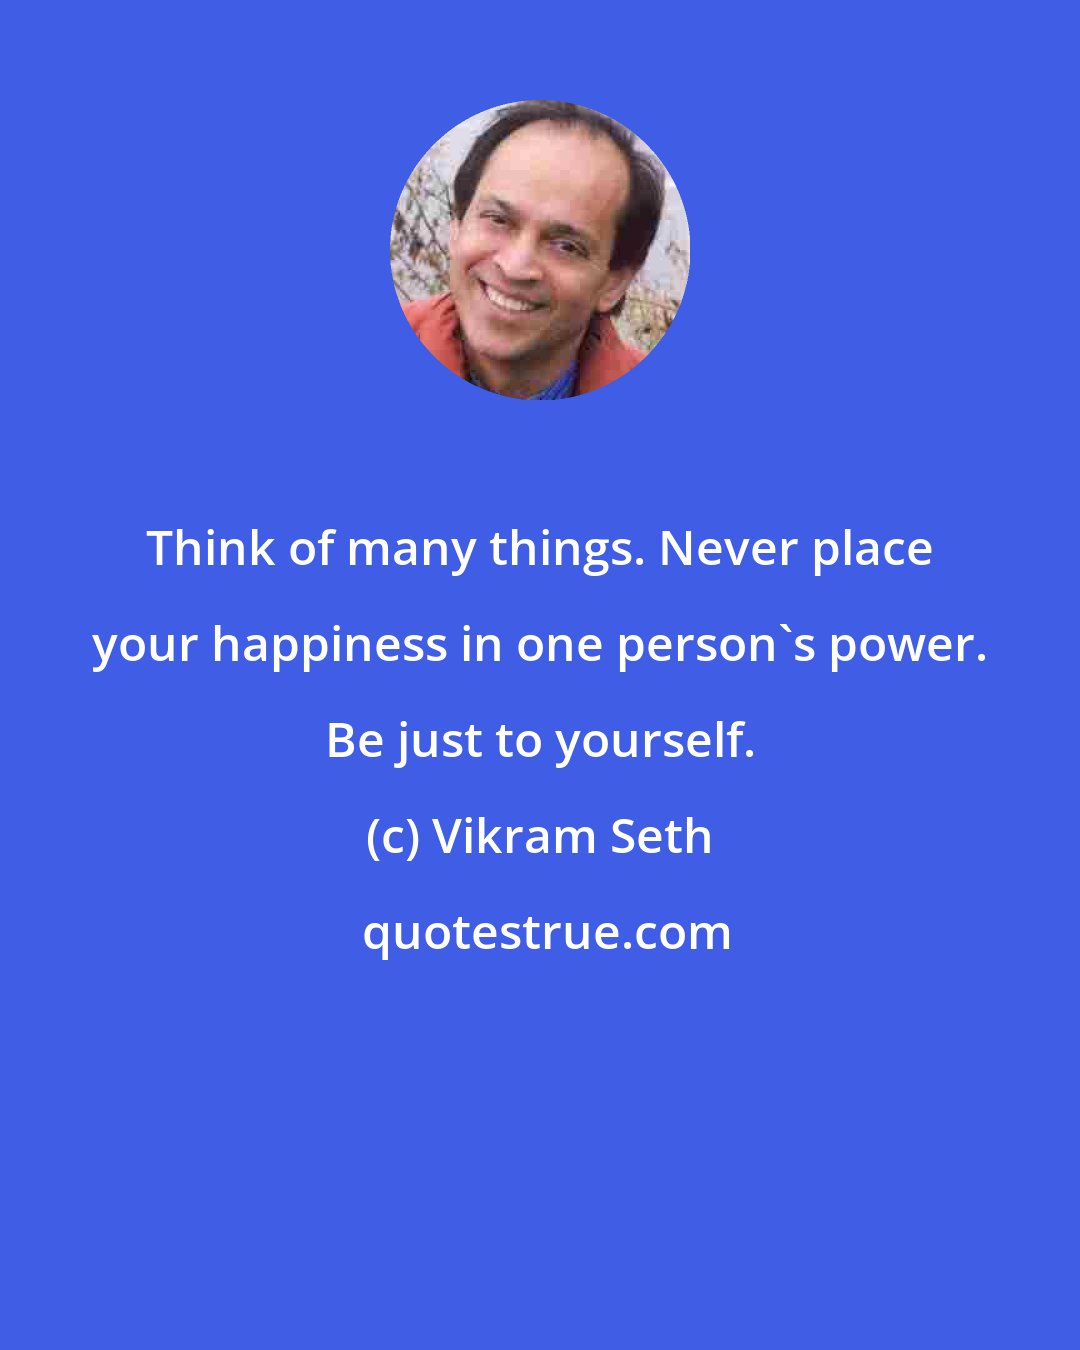 Vikram Seth: Think of many things. Never place your happiness in one person's power. Be just to yourself.